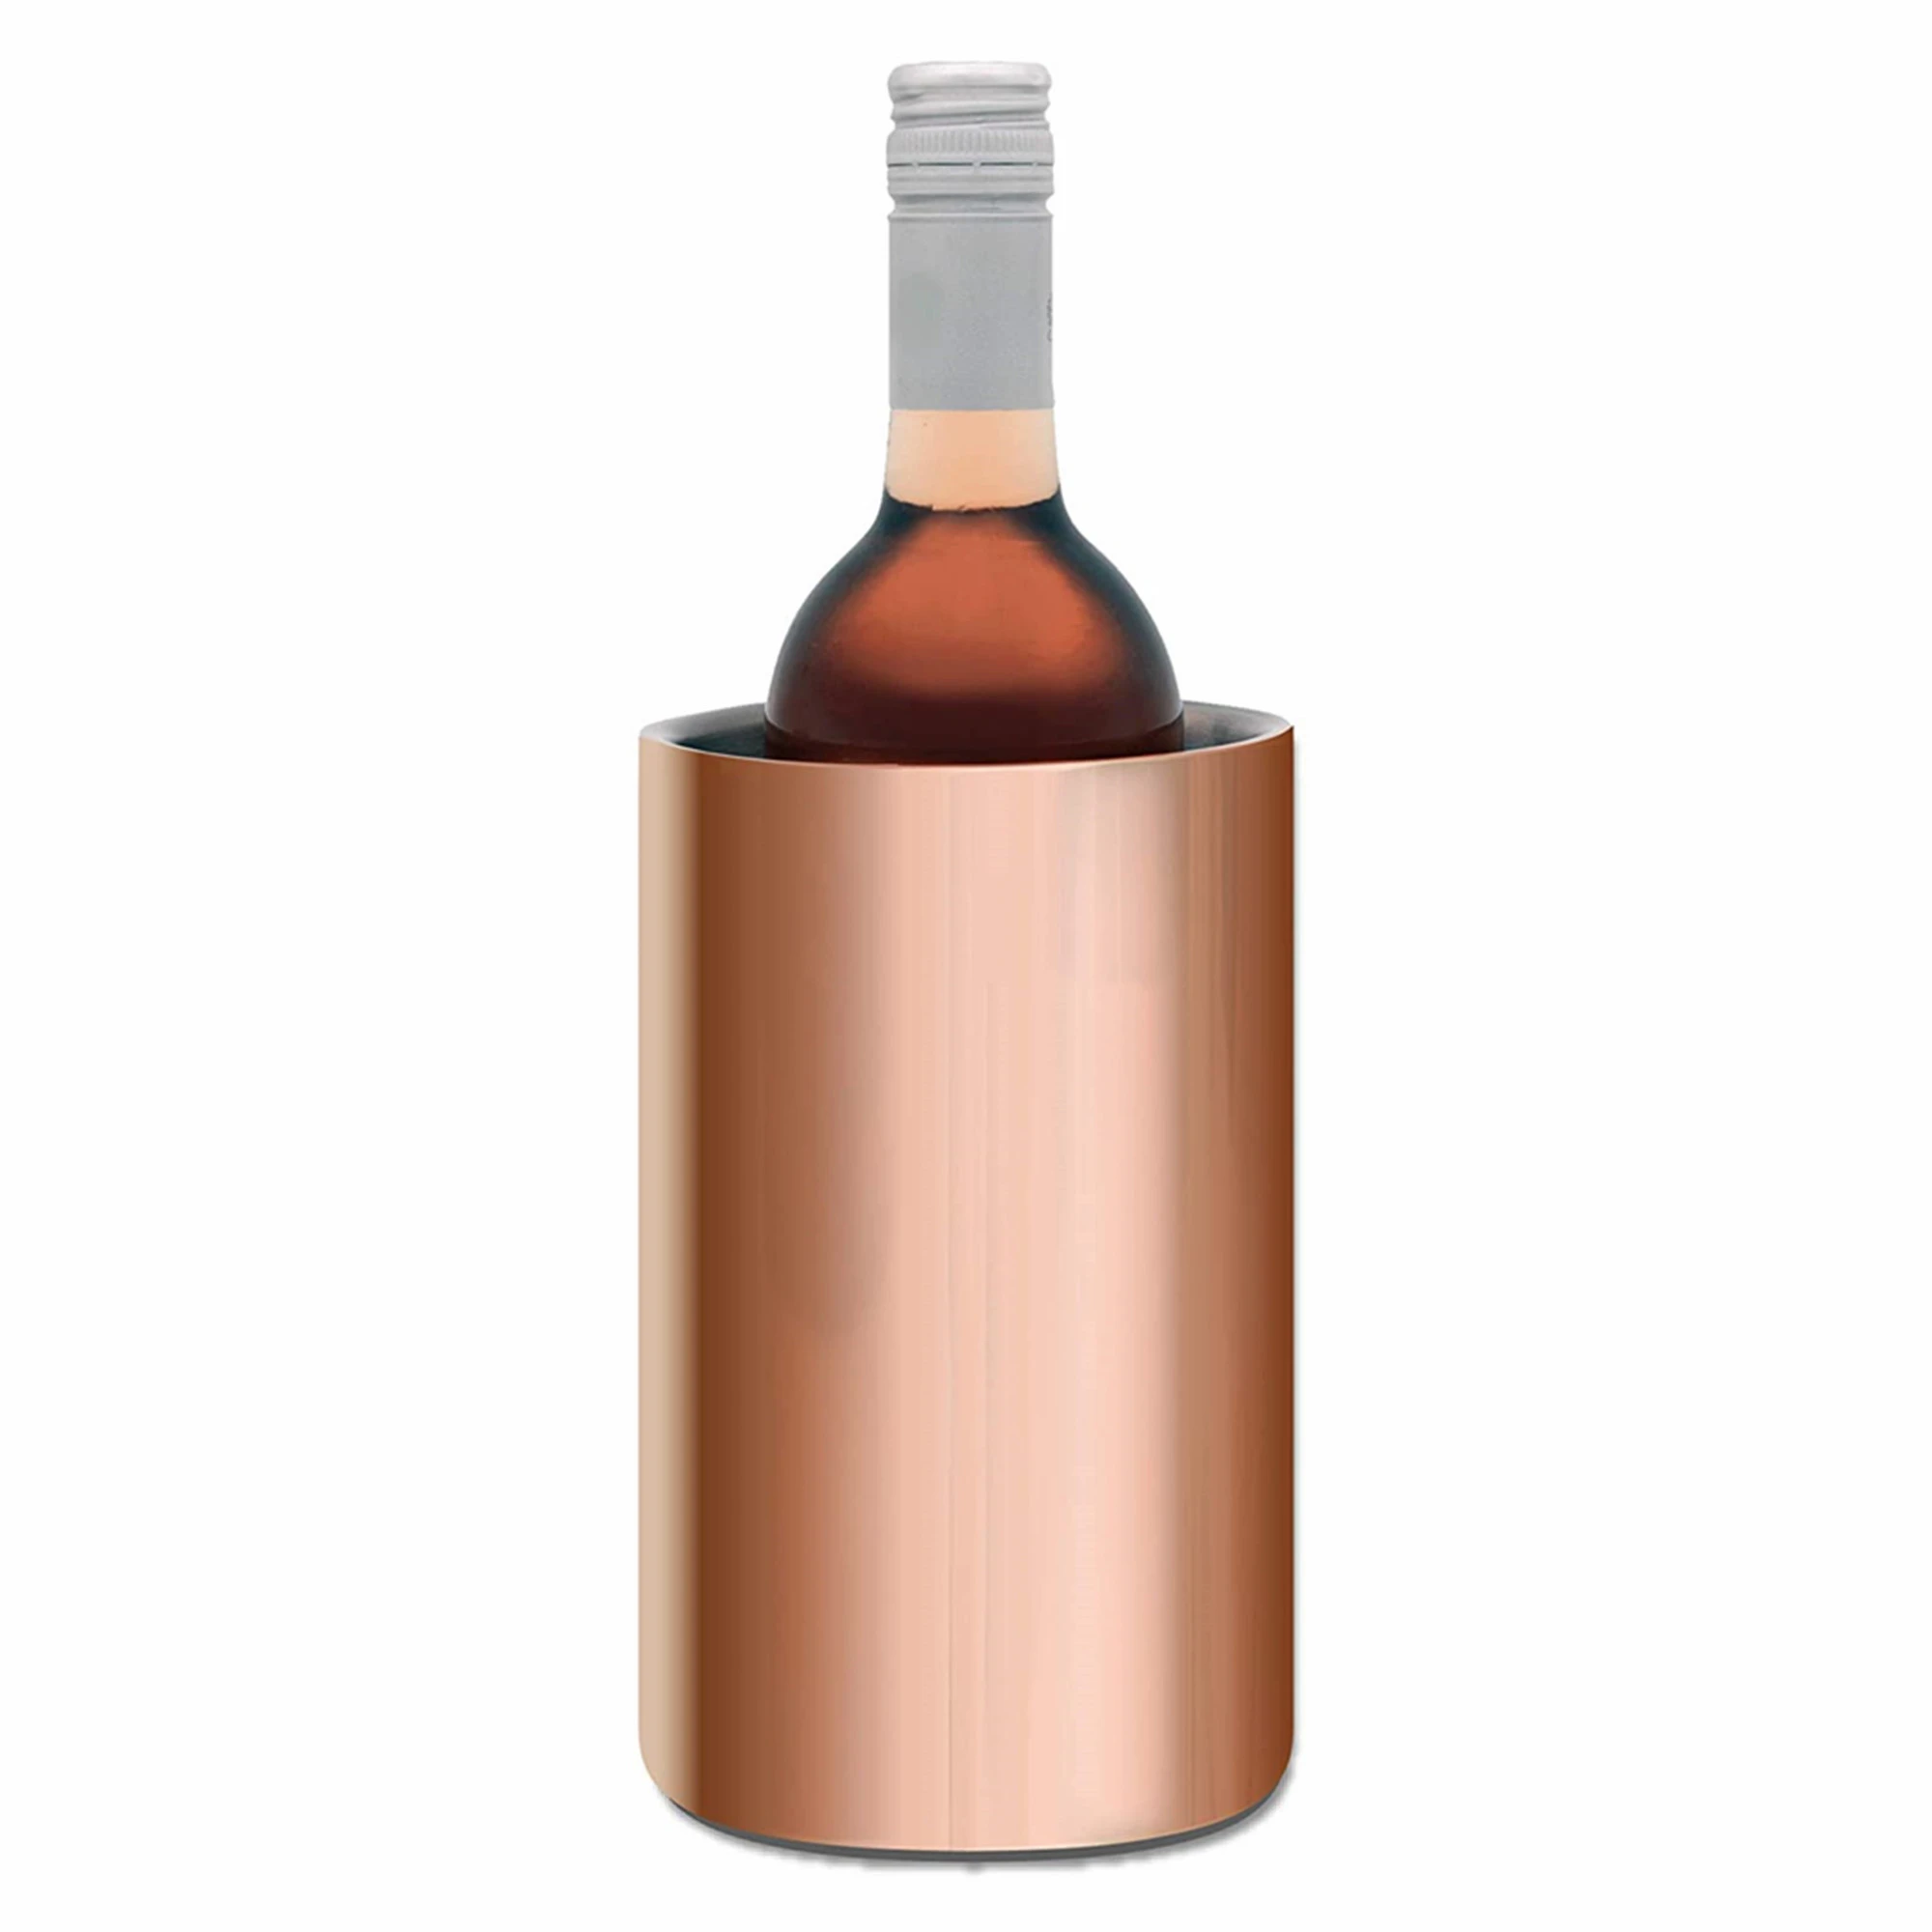 Stainless Steel Insulated Double Walled Portable Wine Champagne Bottle Chiller Ice Bucket Cooler